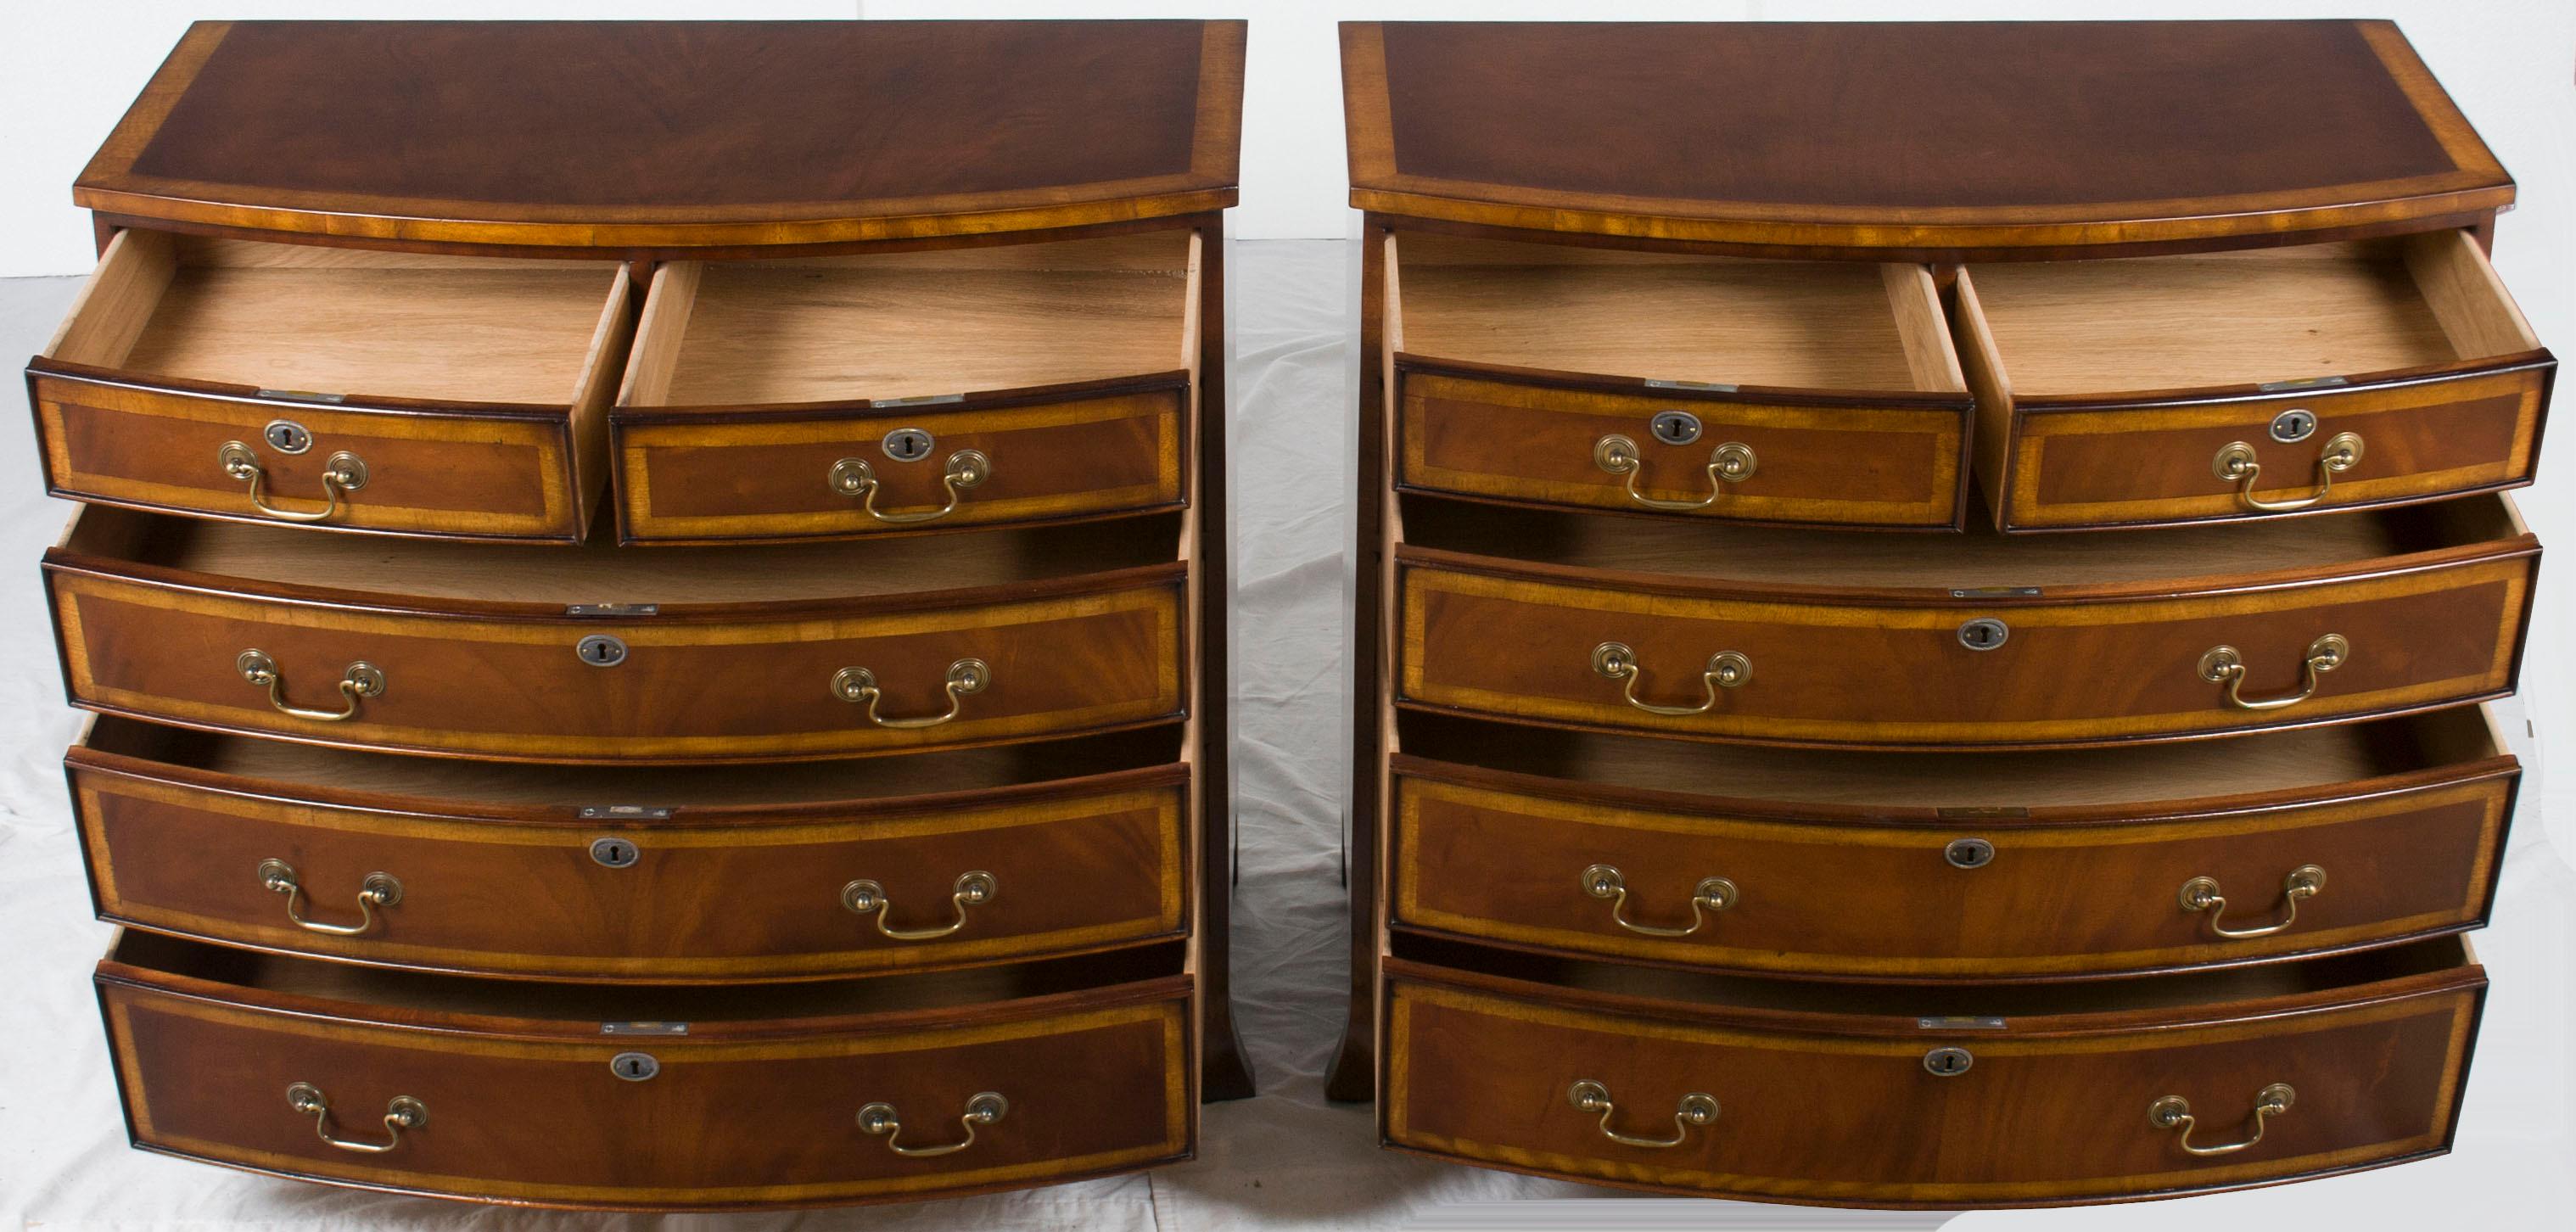 This is a matching pair of newly handcrafted flame mahogany bow front chest of drawers. These dressers were recently made in England by a third generation furniture maker who uses Old World methods to create pieces that have a wonderful antique